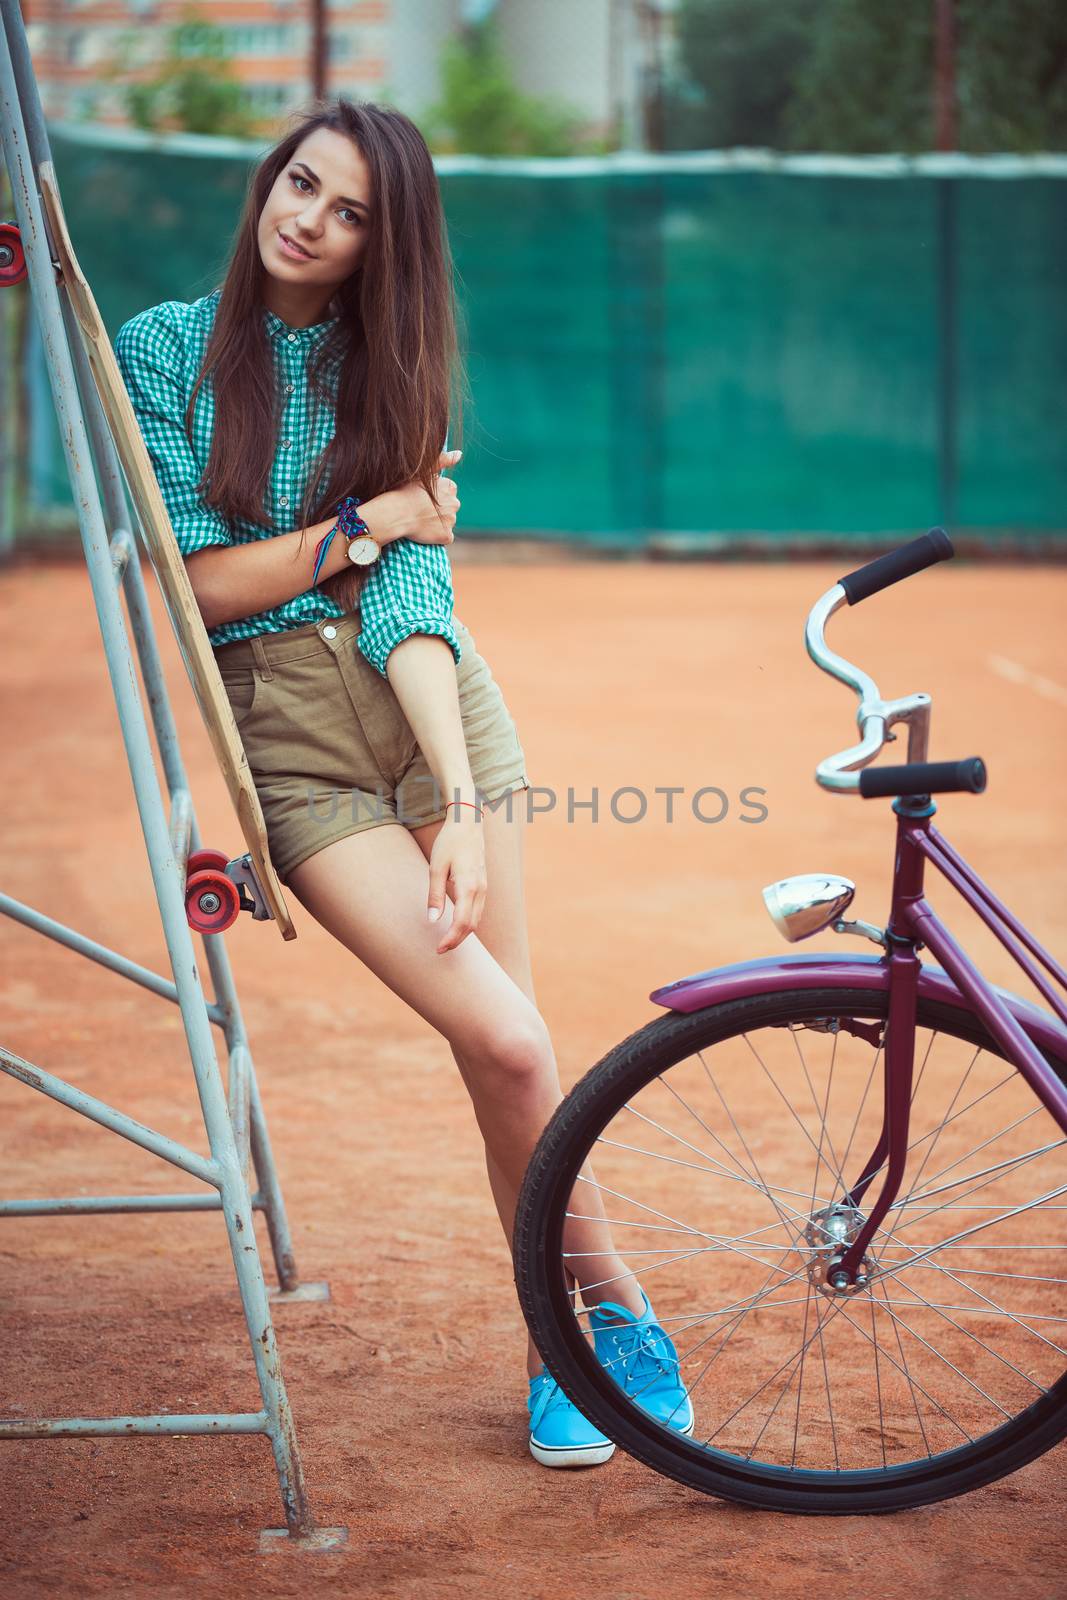 Beautiful young girl with longboard and bicycle standing on the tennis court, outdoor